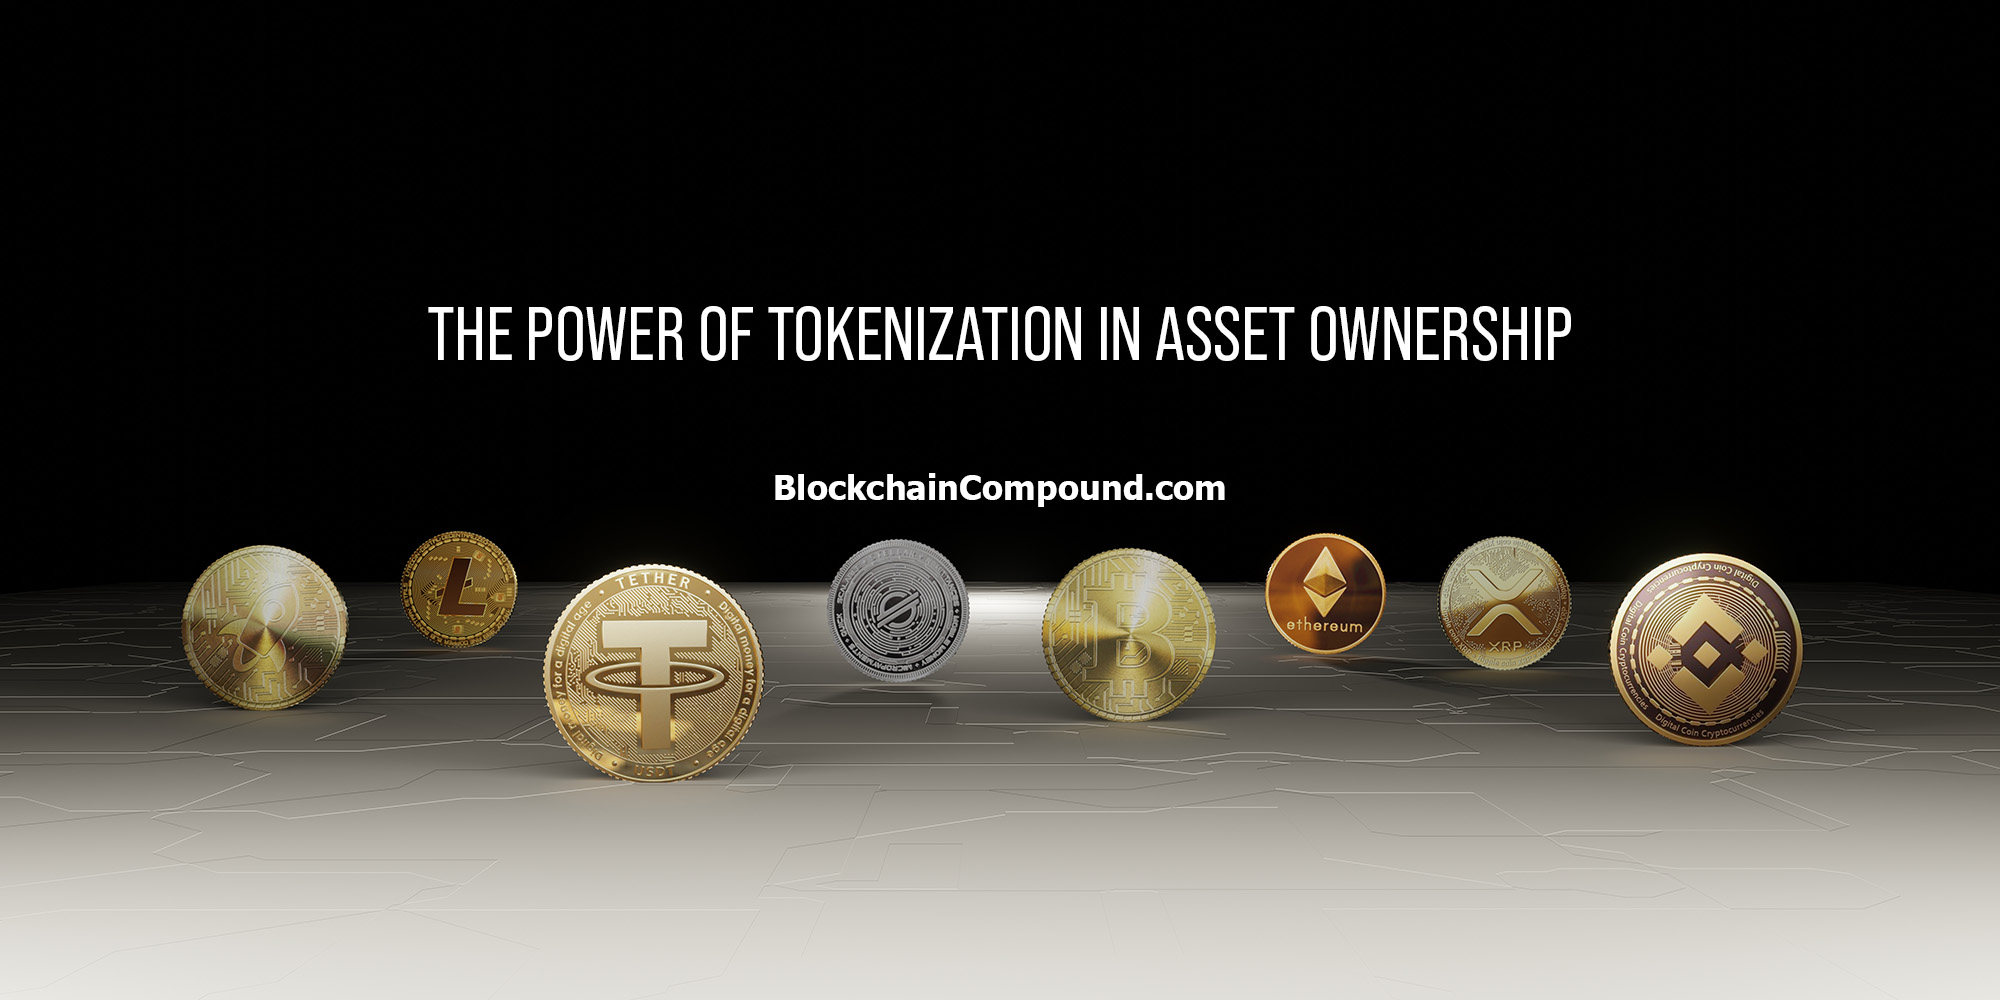 The power of tokenization in asset ownership